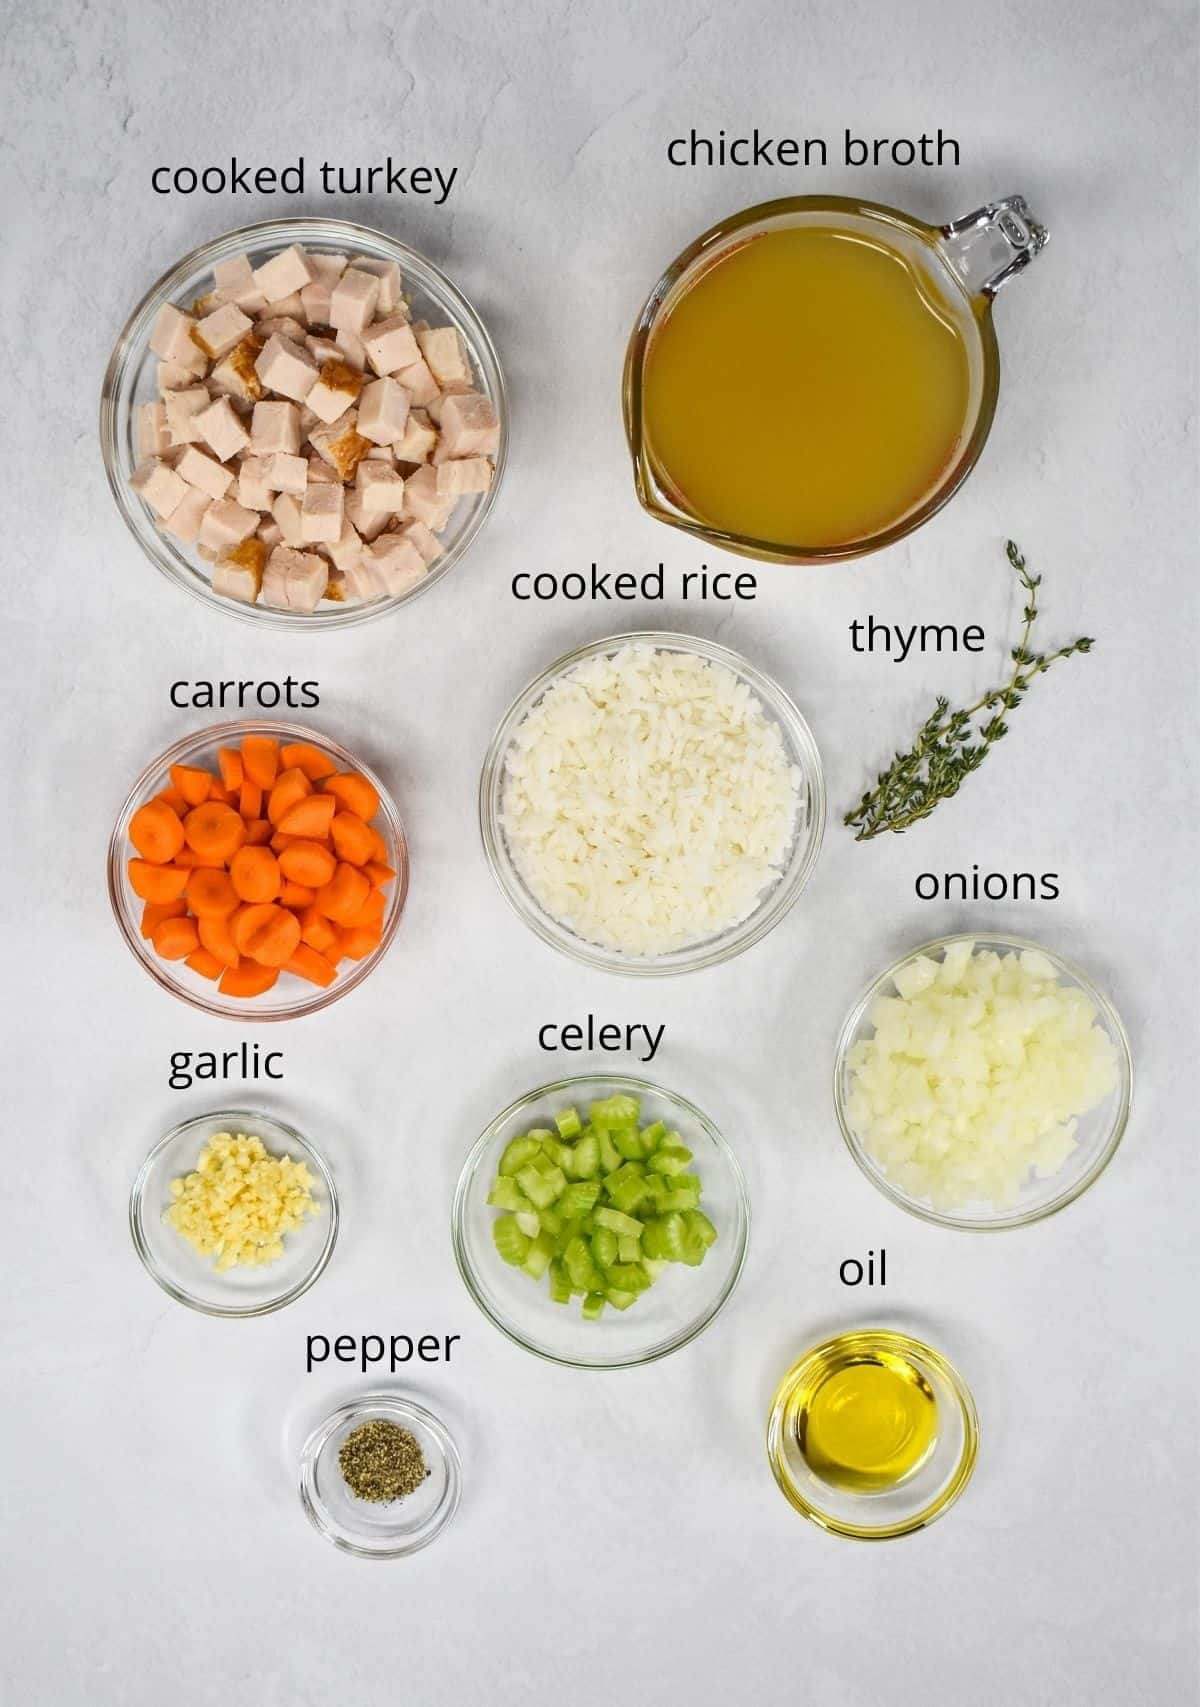 The ingredients for the soup prepped and arranged in glass bowls on a white table. Each ingredient has a label with the name above it in small black letters.